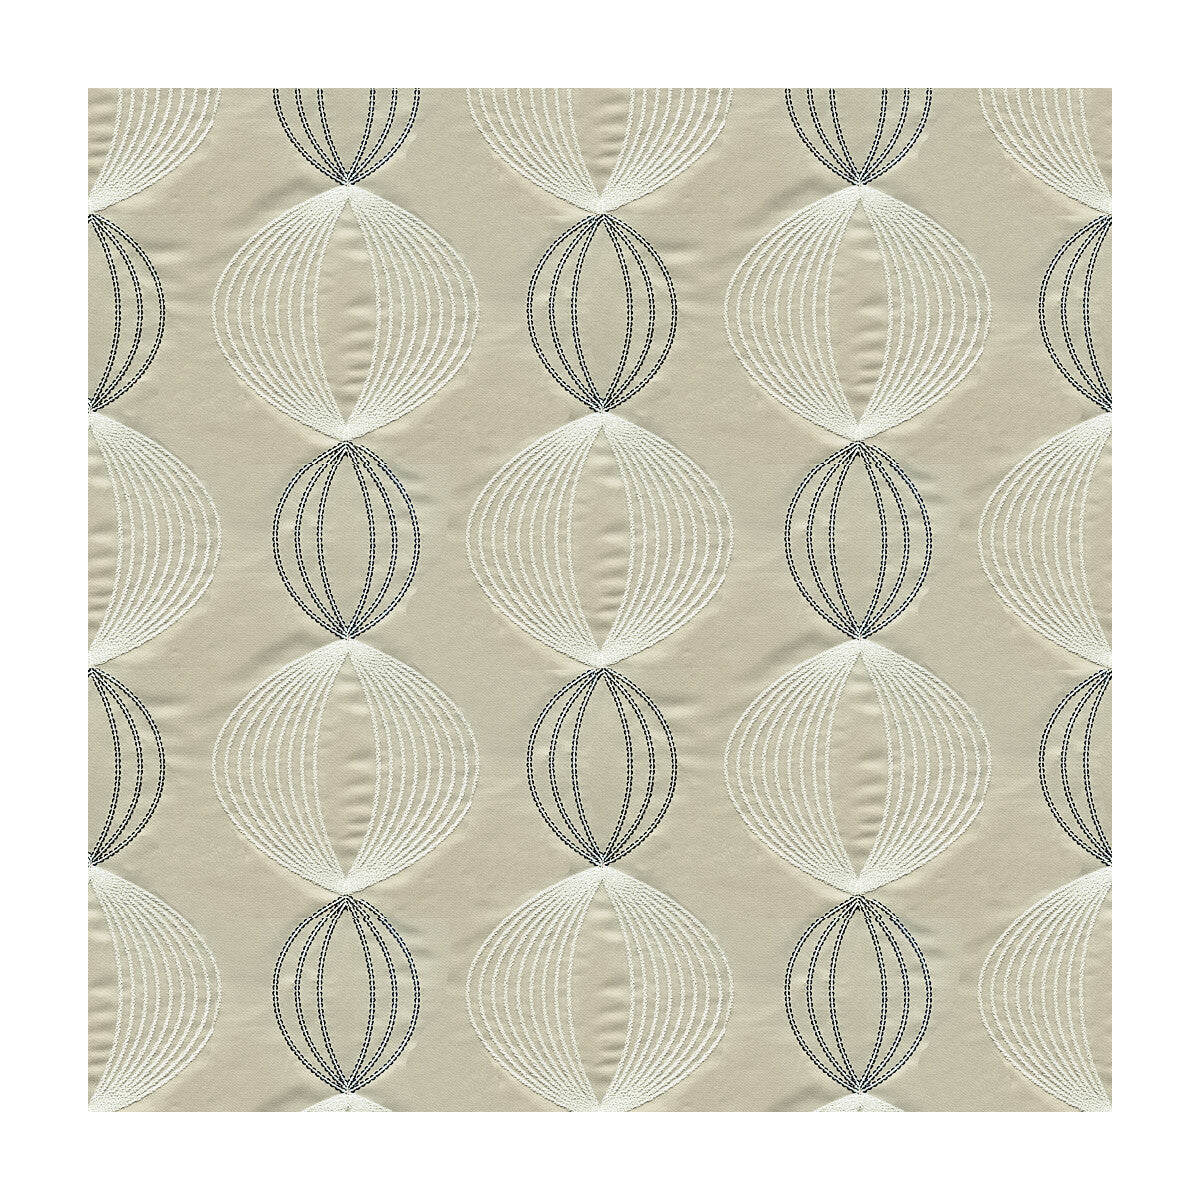 Virga fabric in greige color - pattern 4196.1611.0 - by Kravet Design in the Candice Olson collection